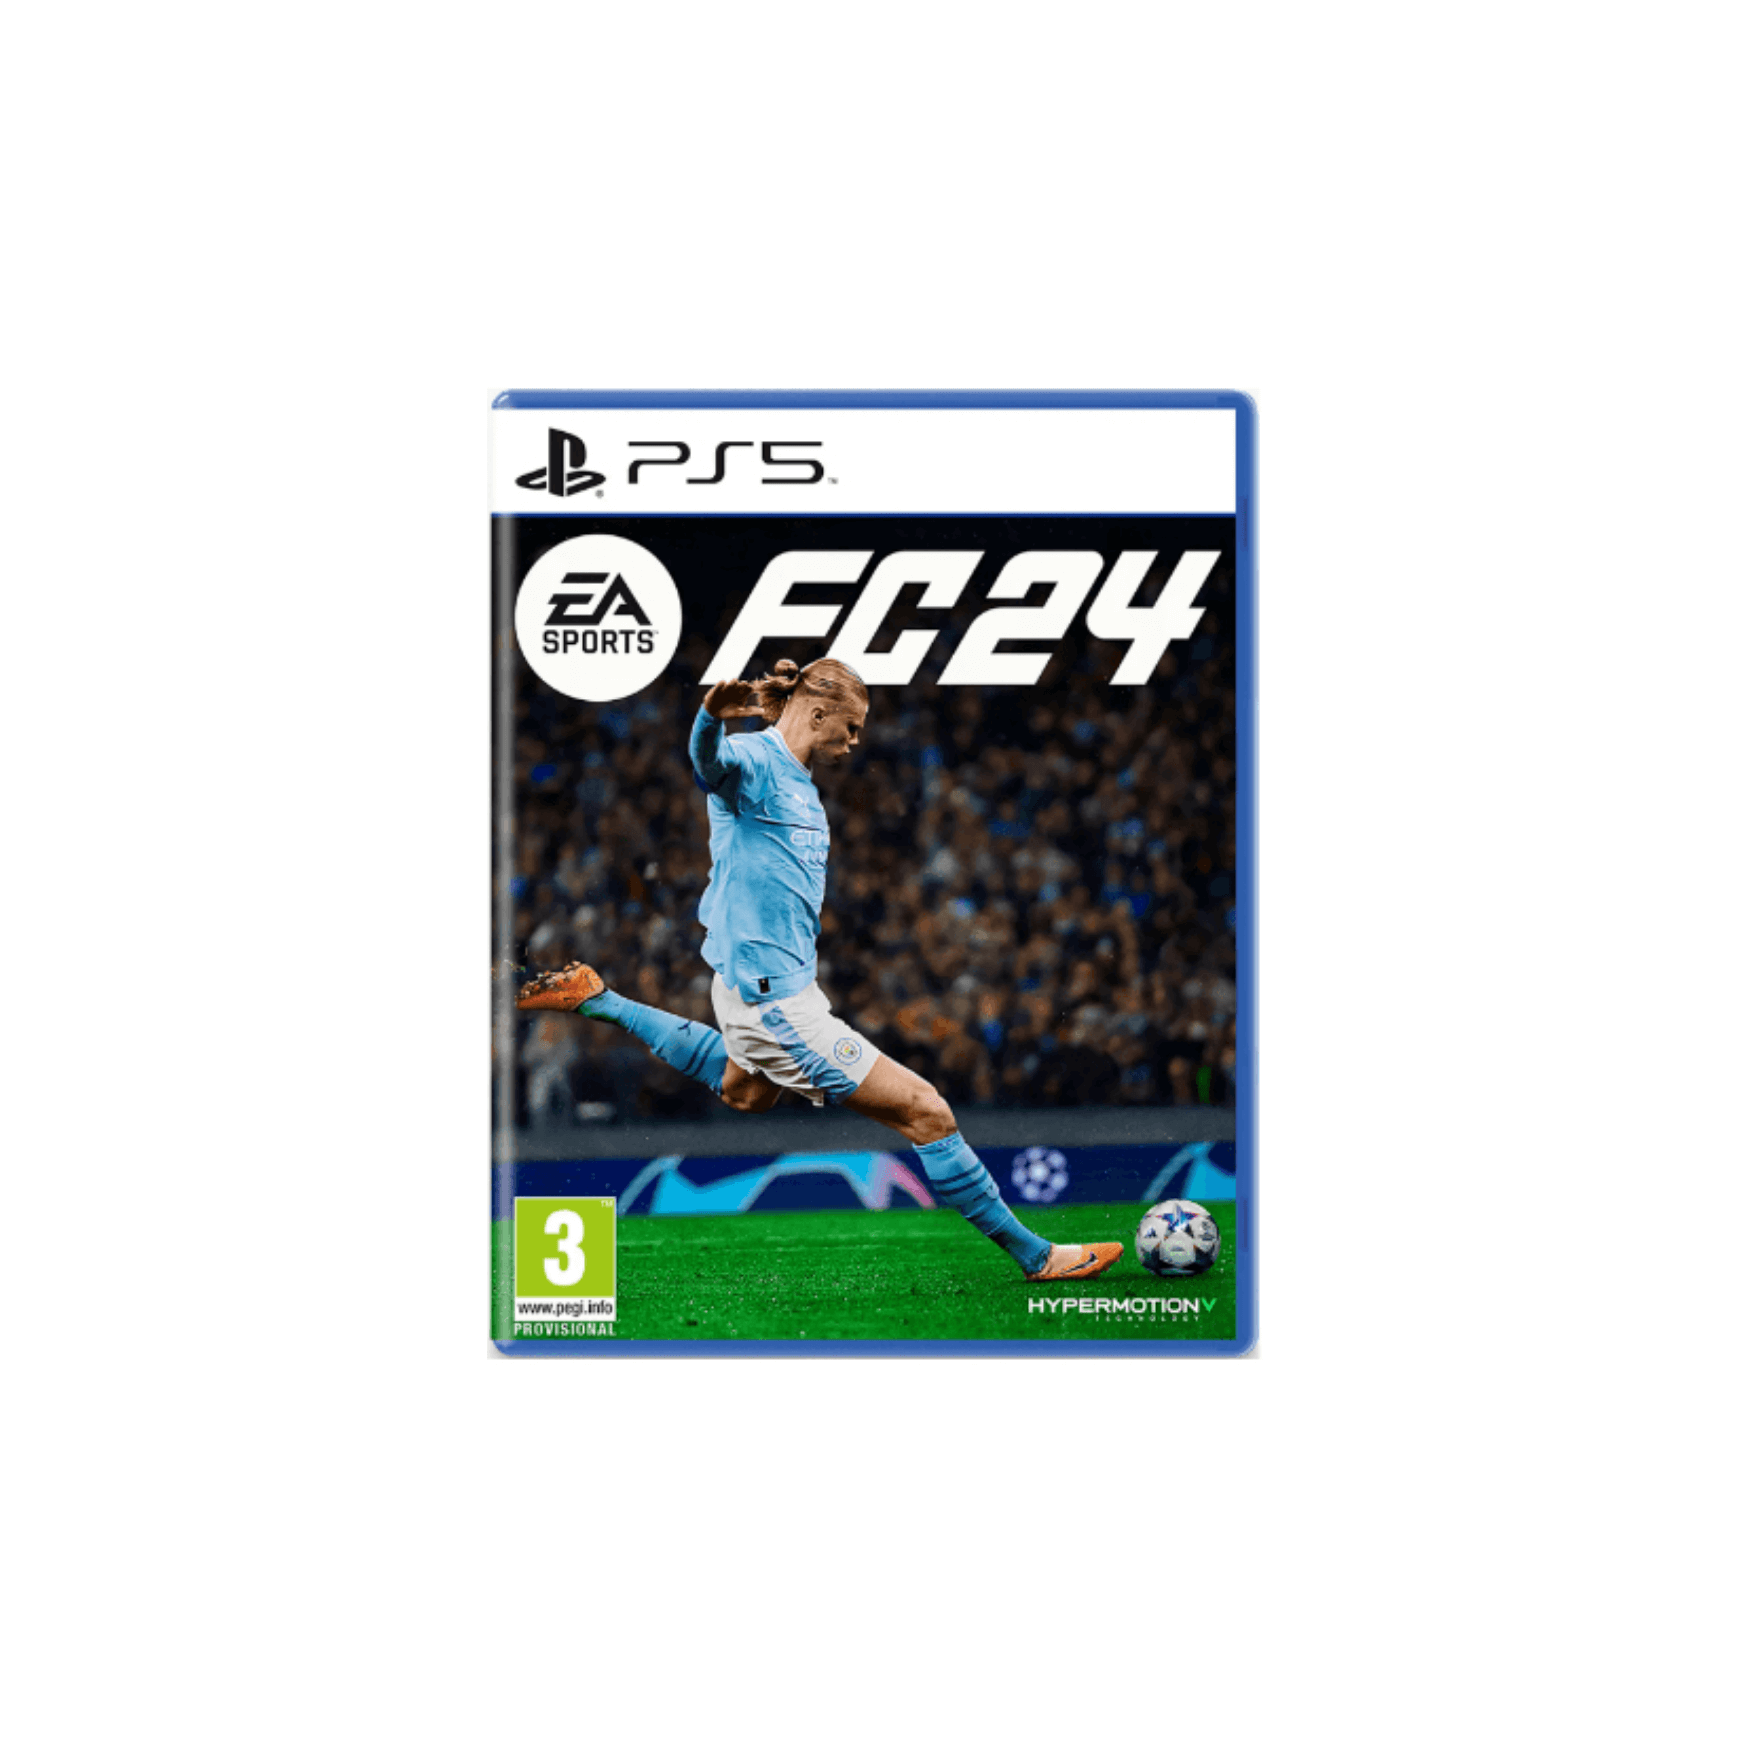 Sony PS5 Game EA Sport FC24